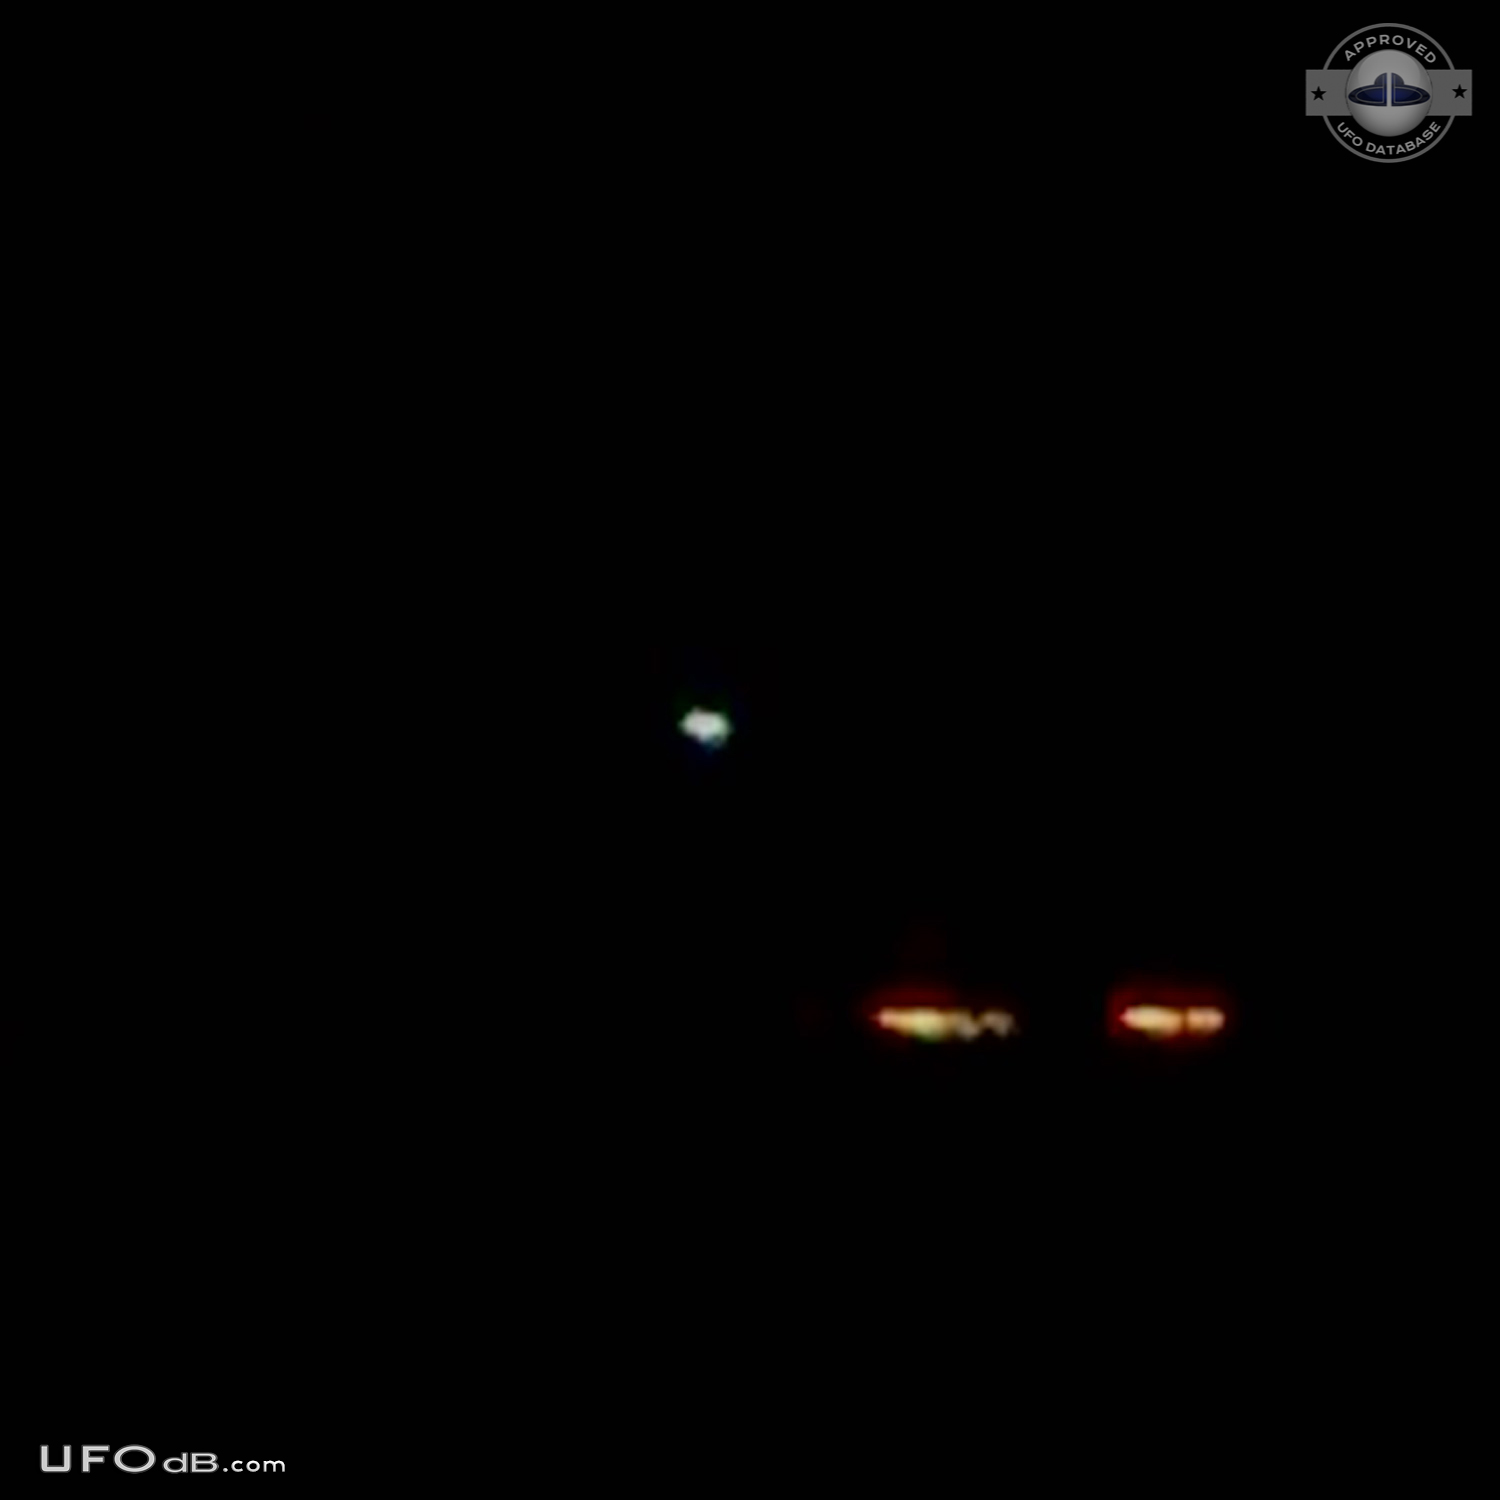 Extremely bright and beautiful UFOs seen in San Jose, California 2012 UFO Picture #537-1